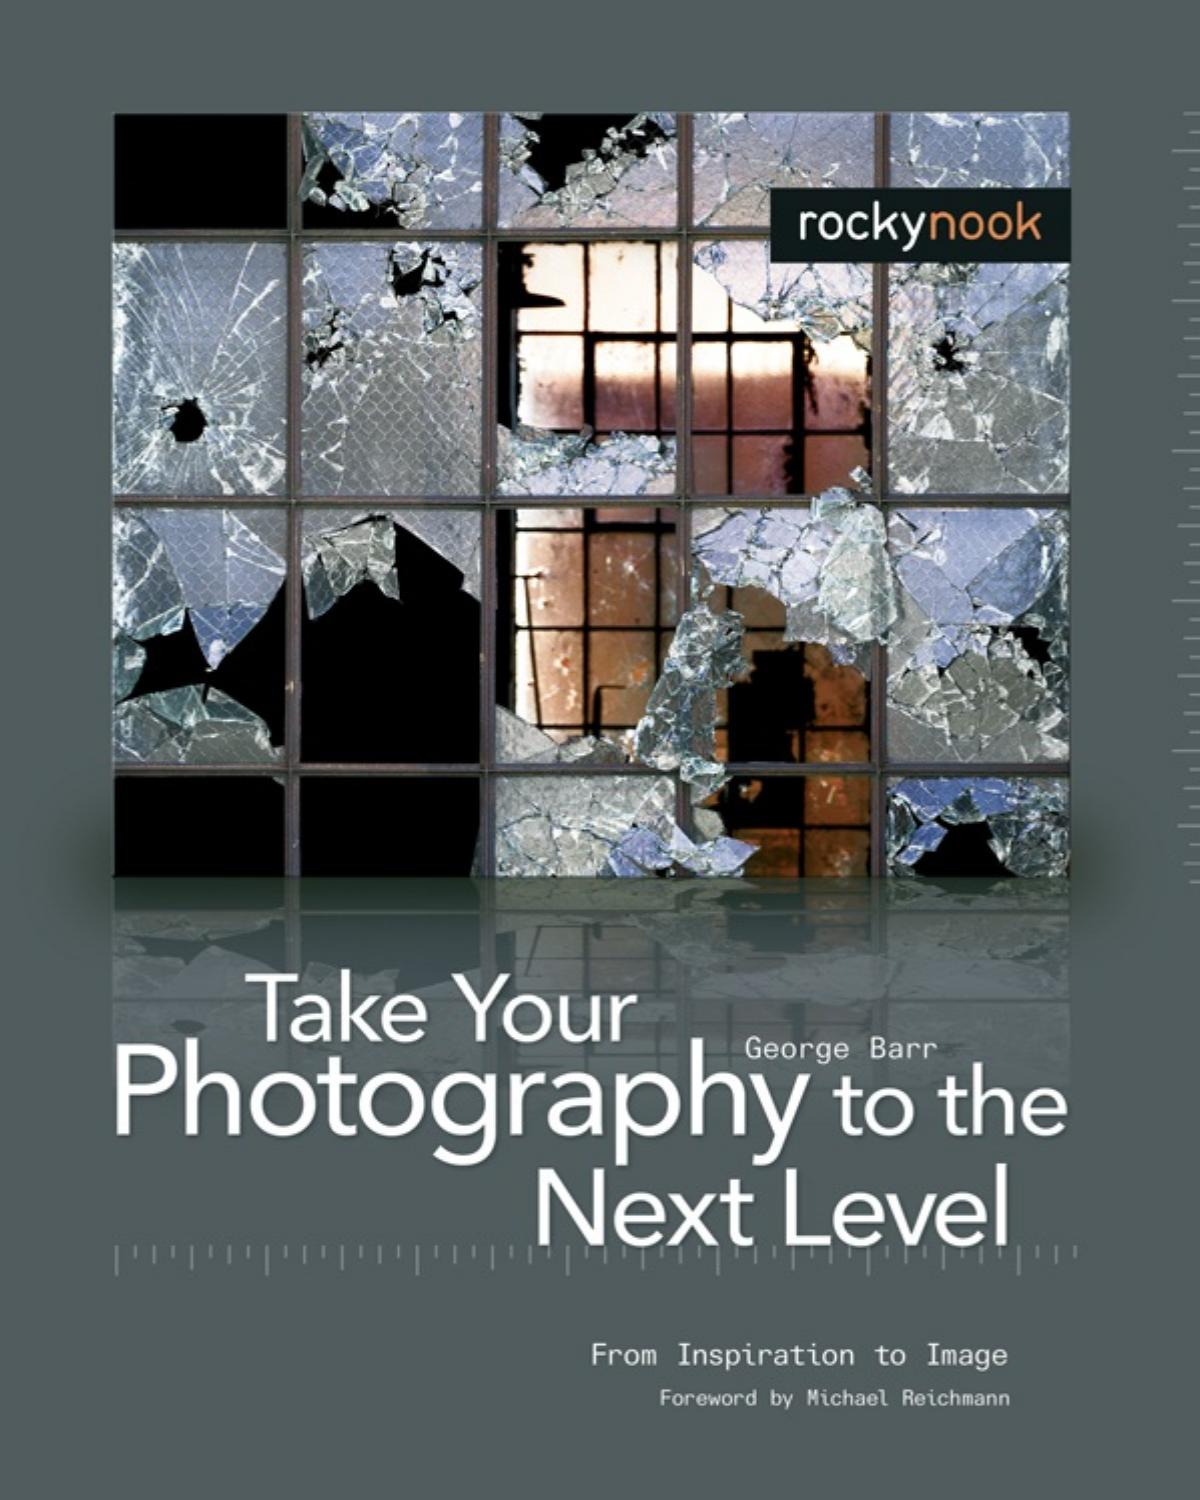 Take Your Photography to the Next Level by George Barr